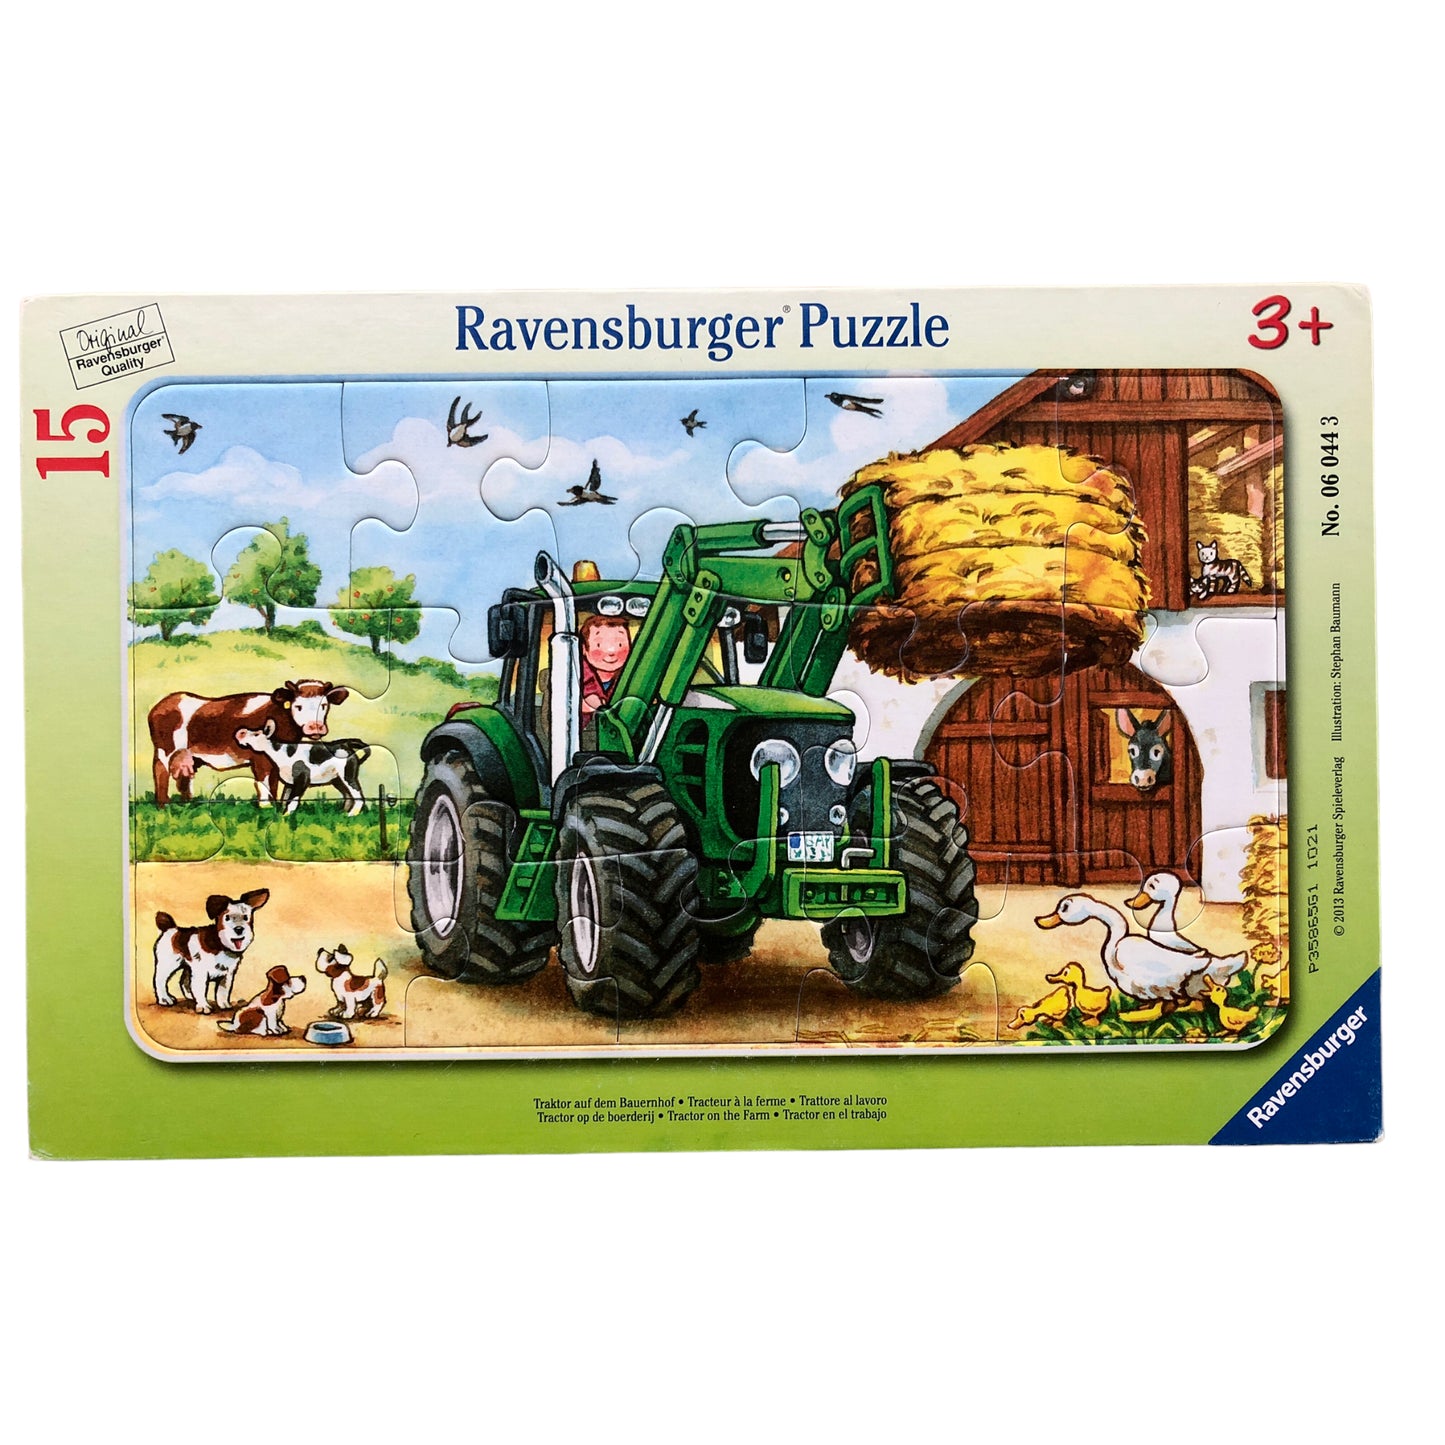 Ravensburger Puzzle - Tractor on the Farm - 15 pieces